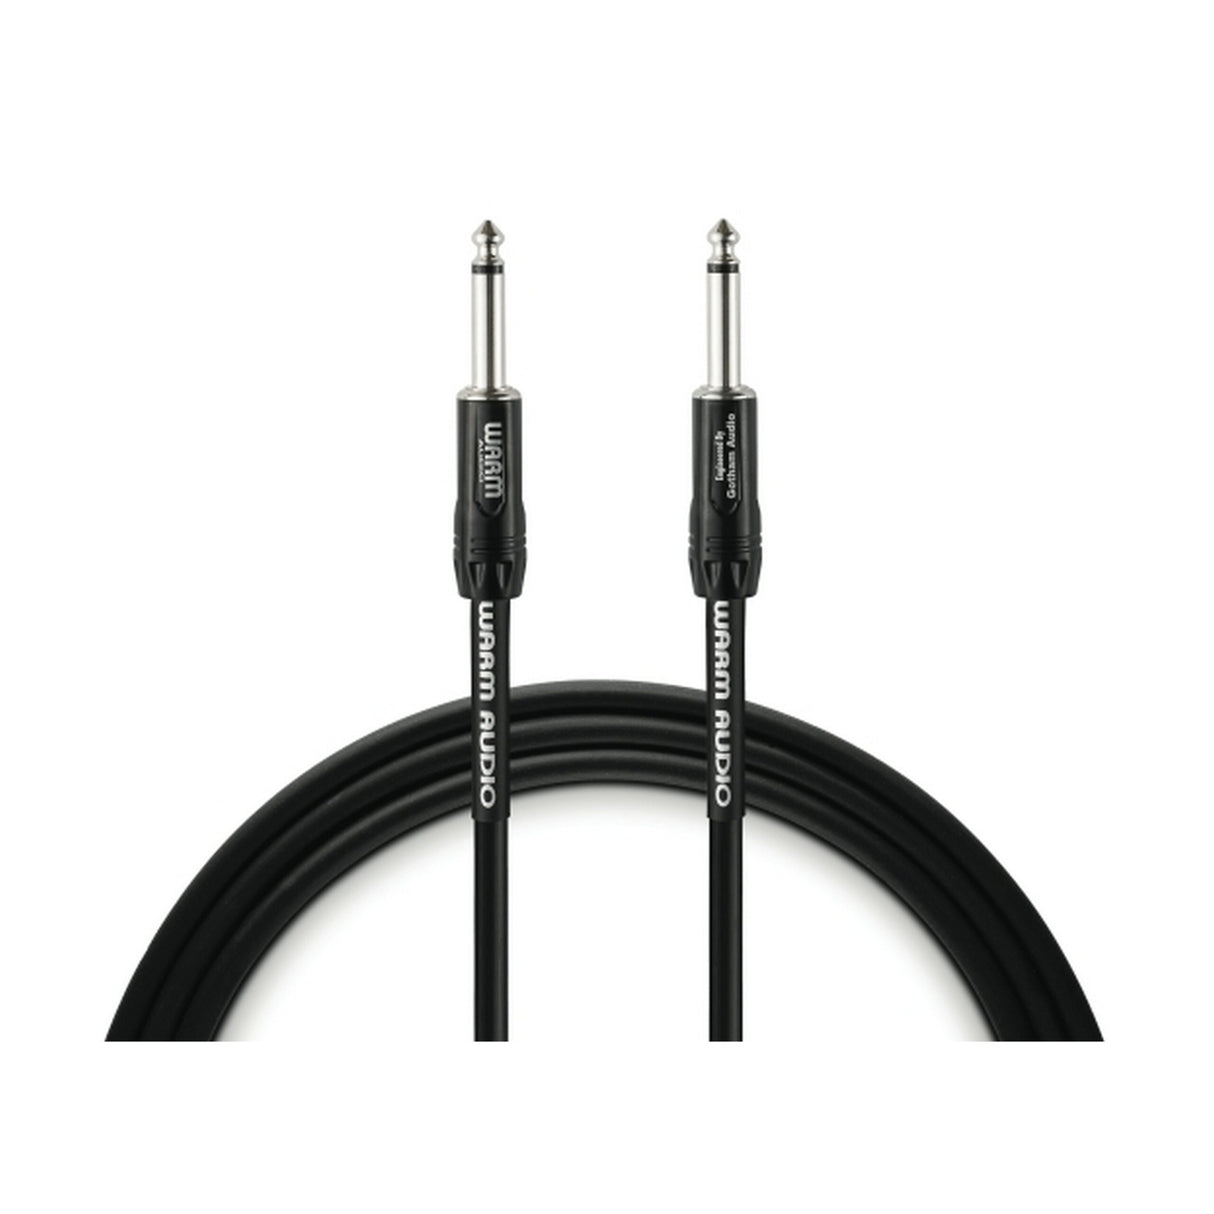 Warm Audio PRO-TS-10 Pro Series Instrument Cable, 10 Foot